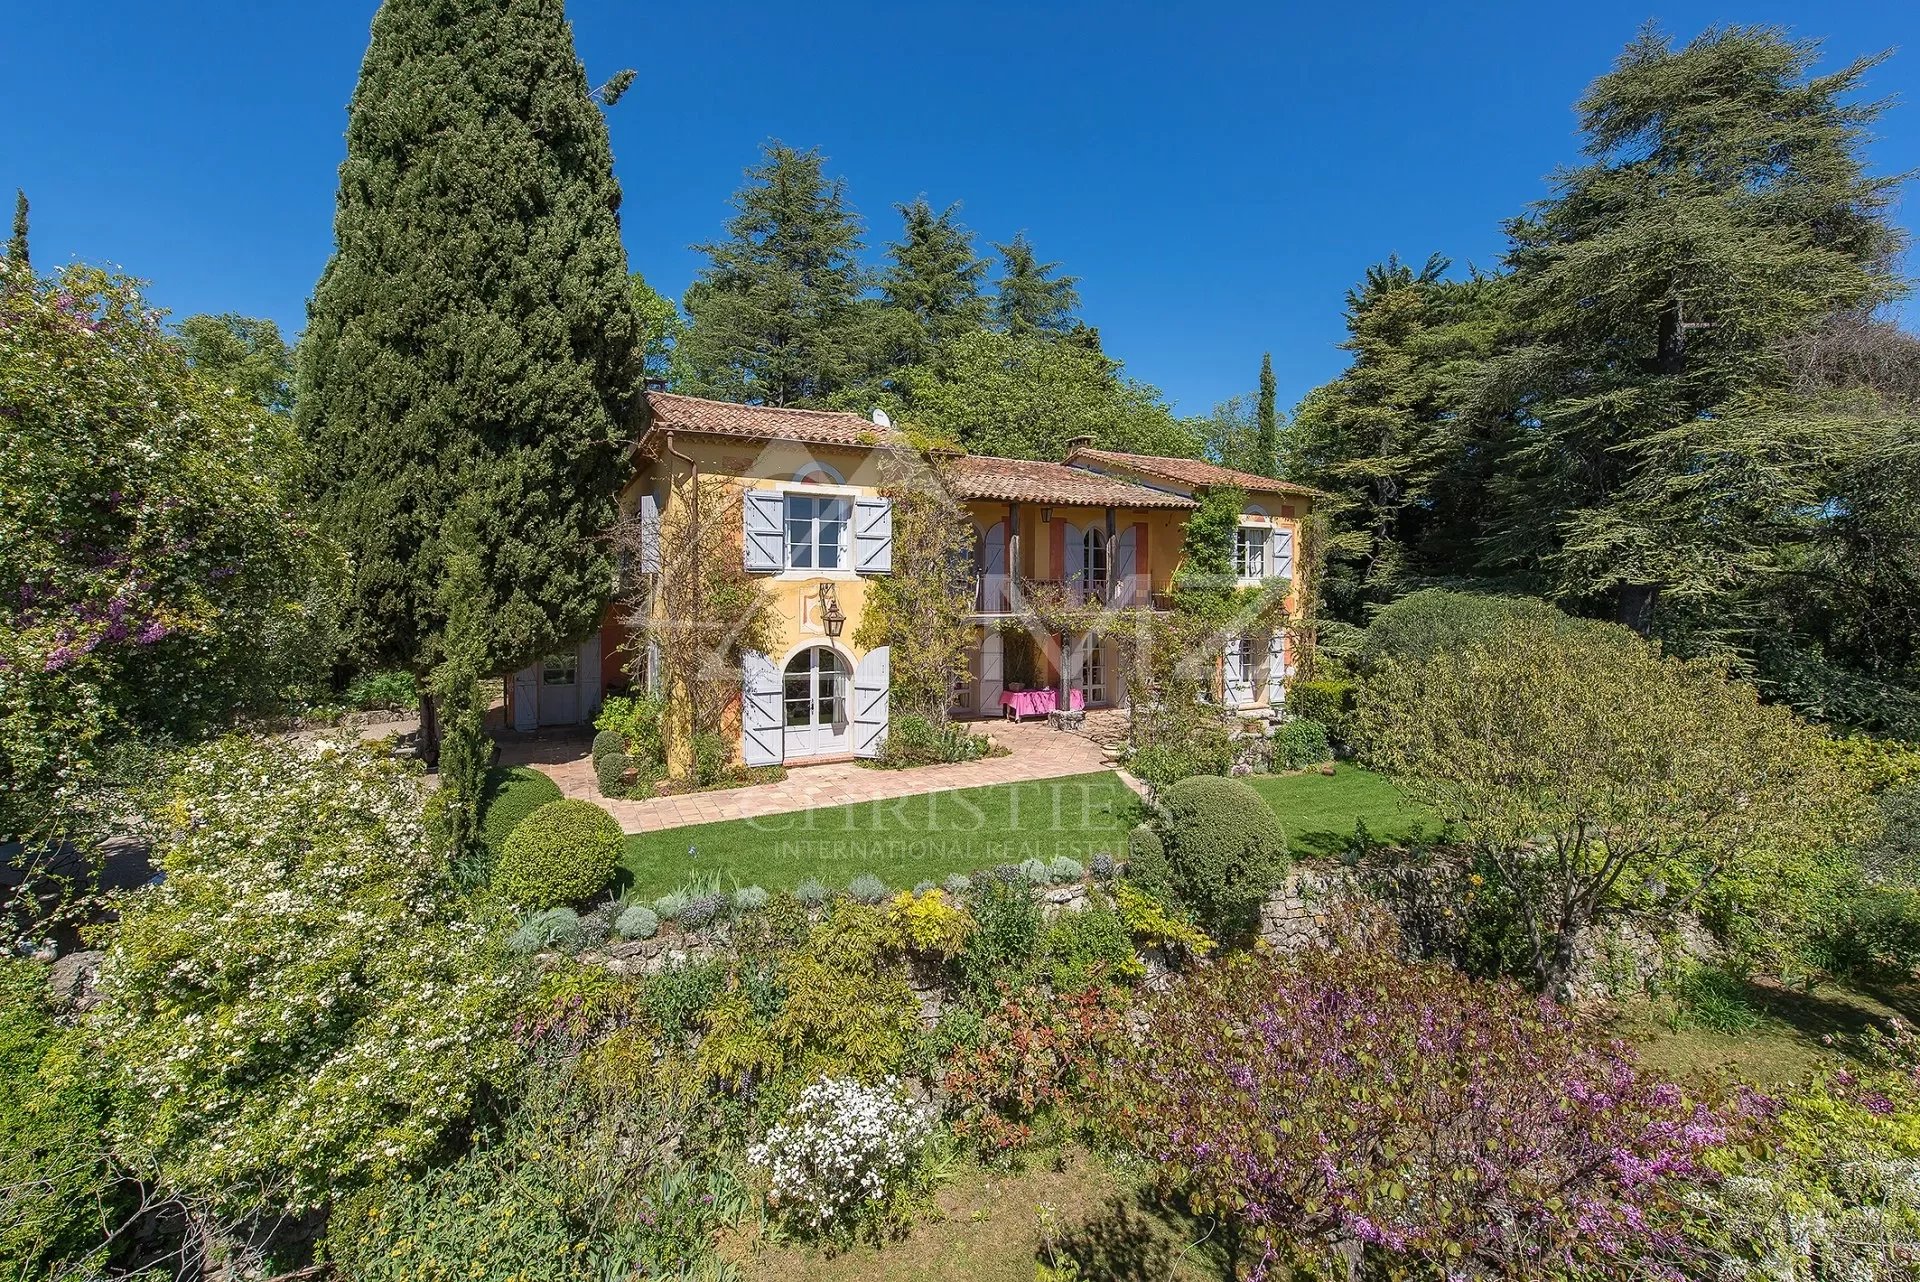 Cannes backcountry - Remarkable gardens